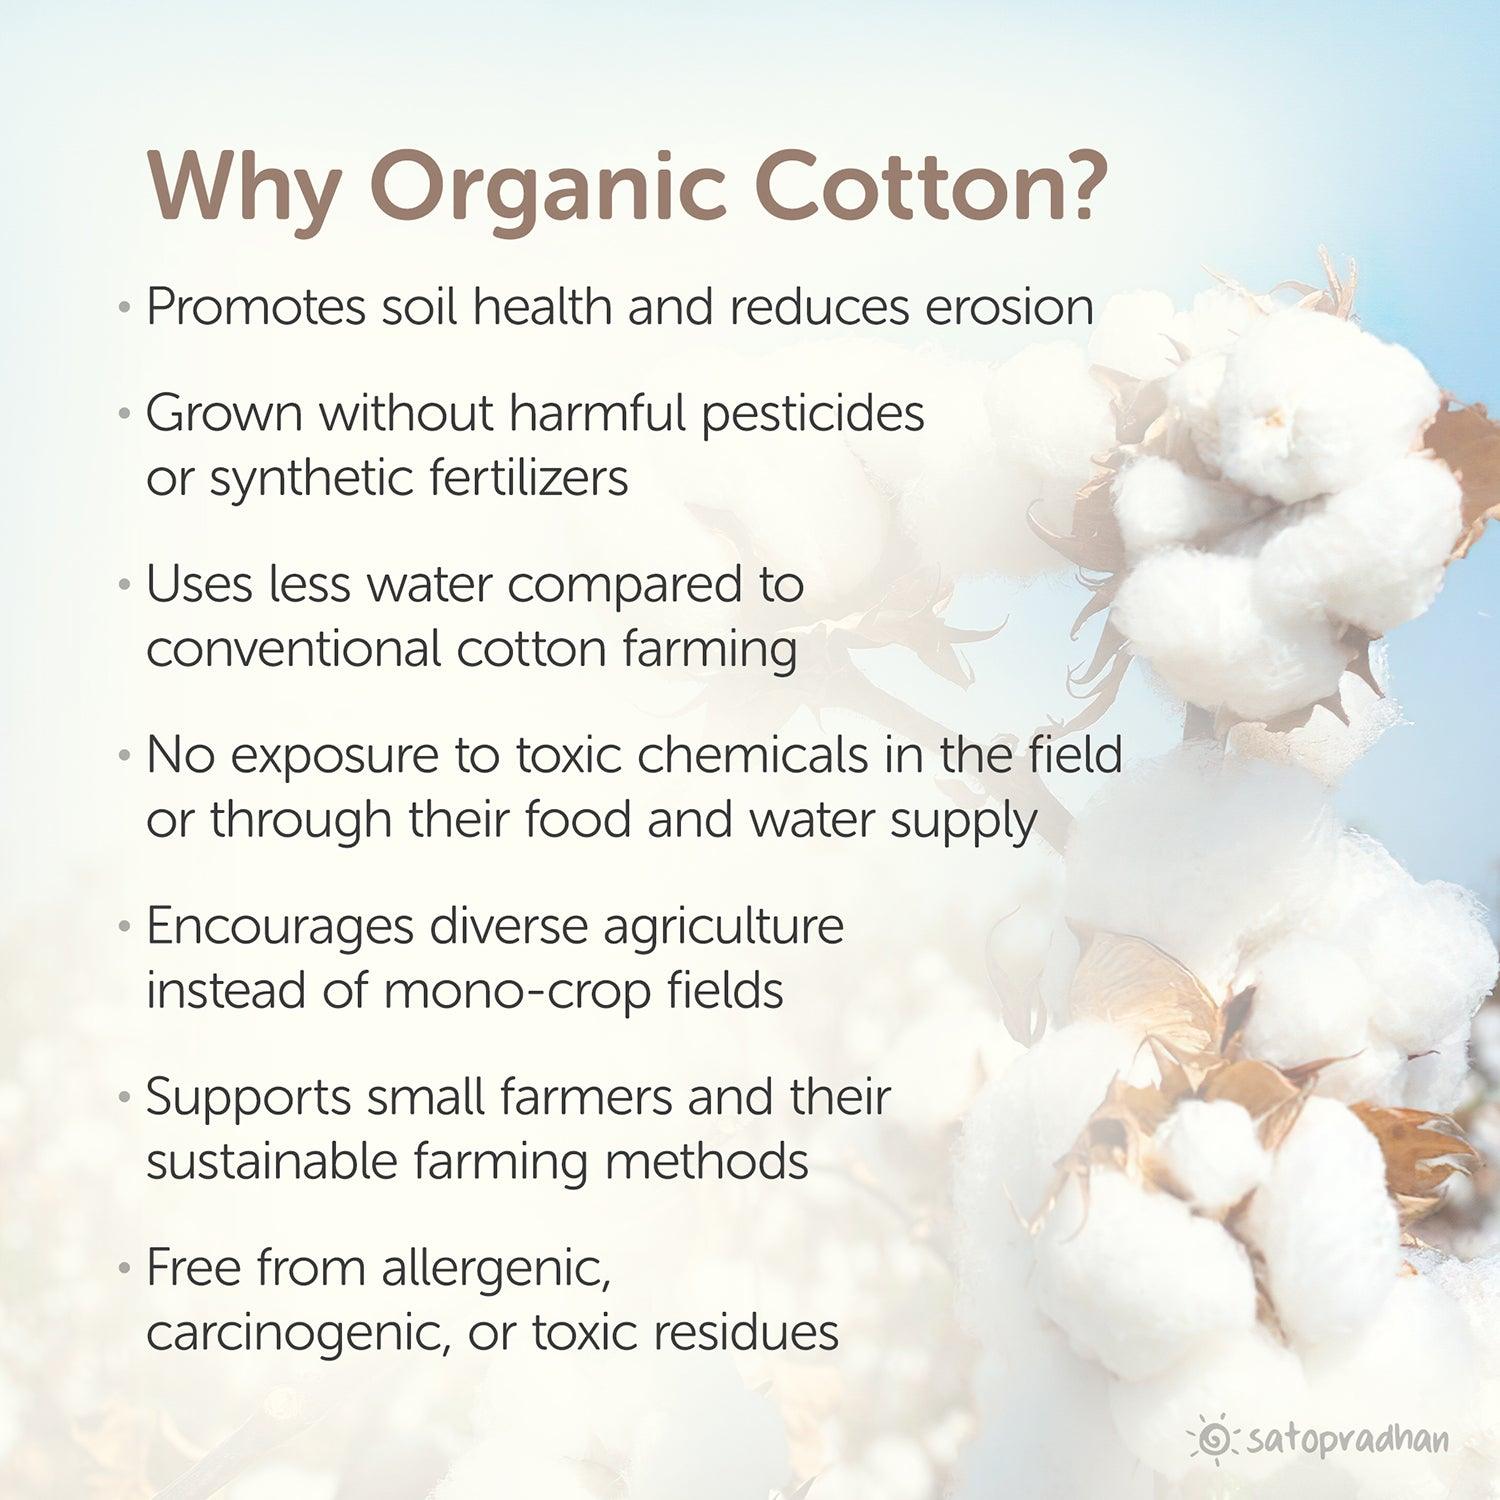 Using organic cotton helps in supporting sustainable farming and enviornment by not using synthetic fertilizers 